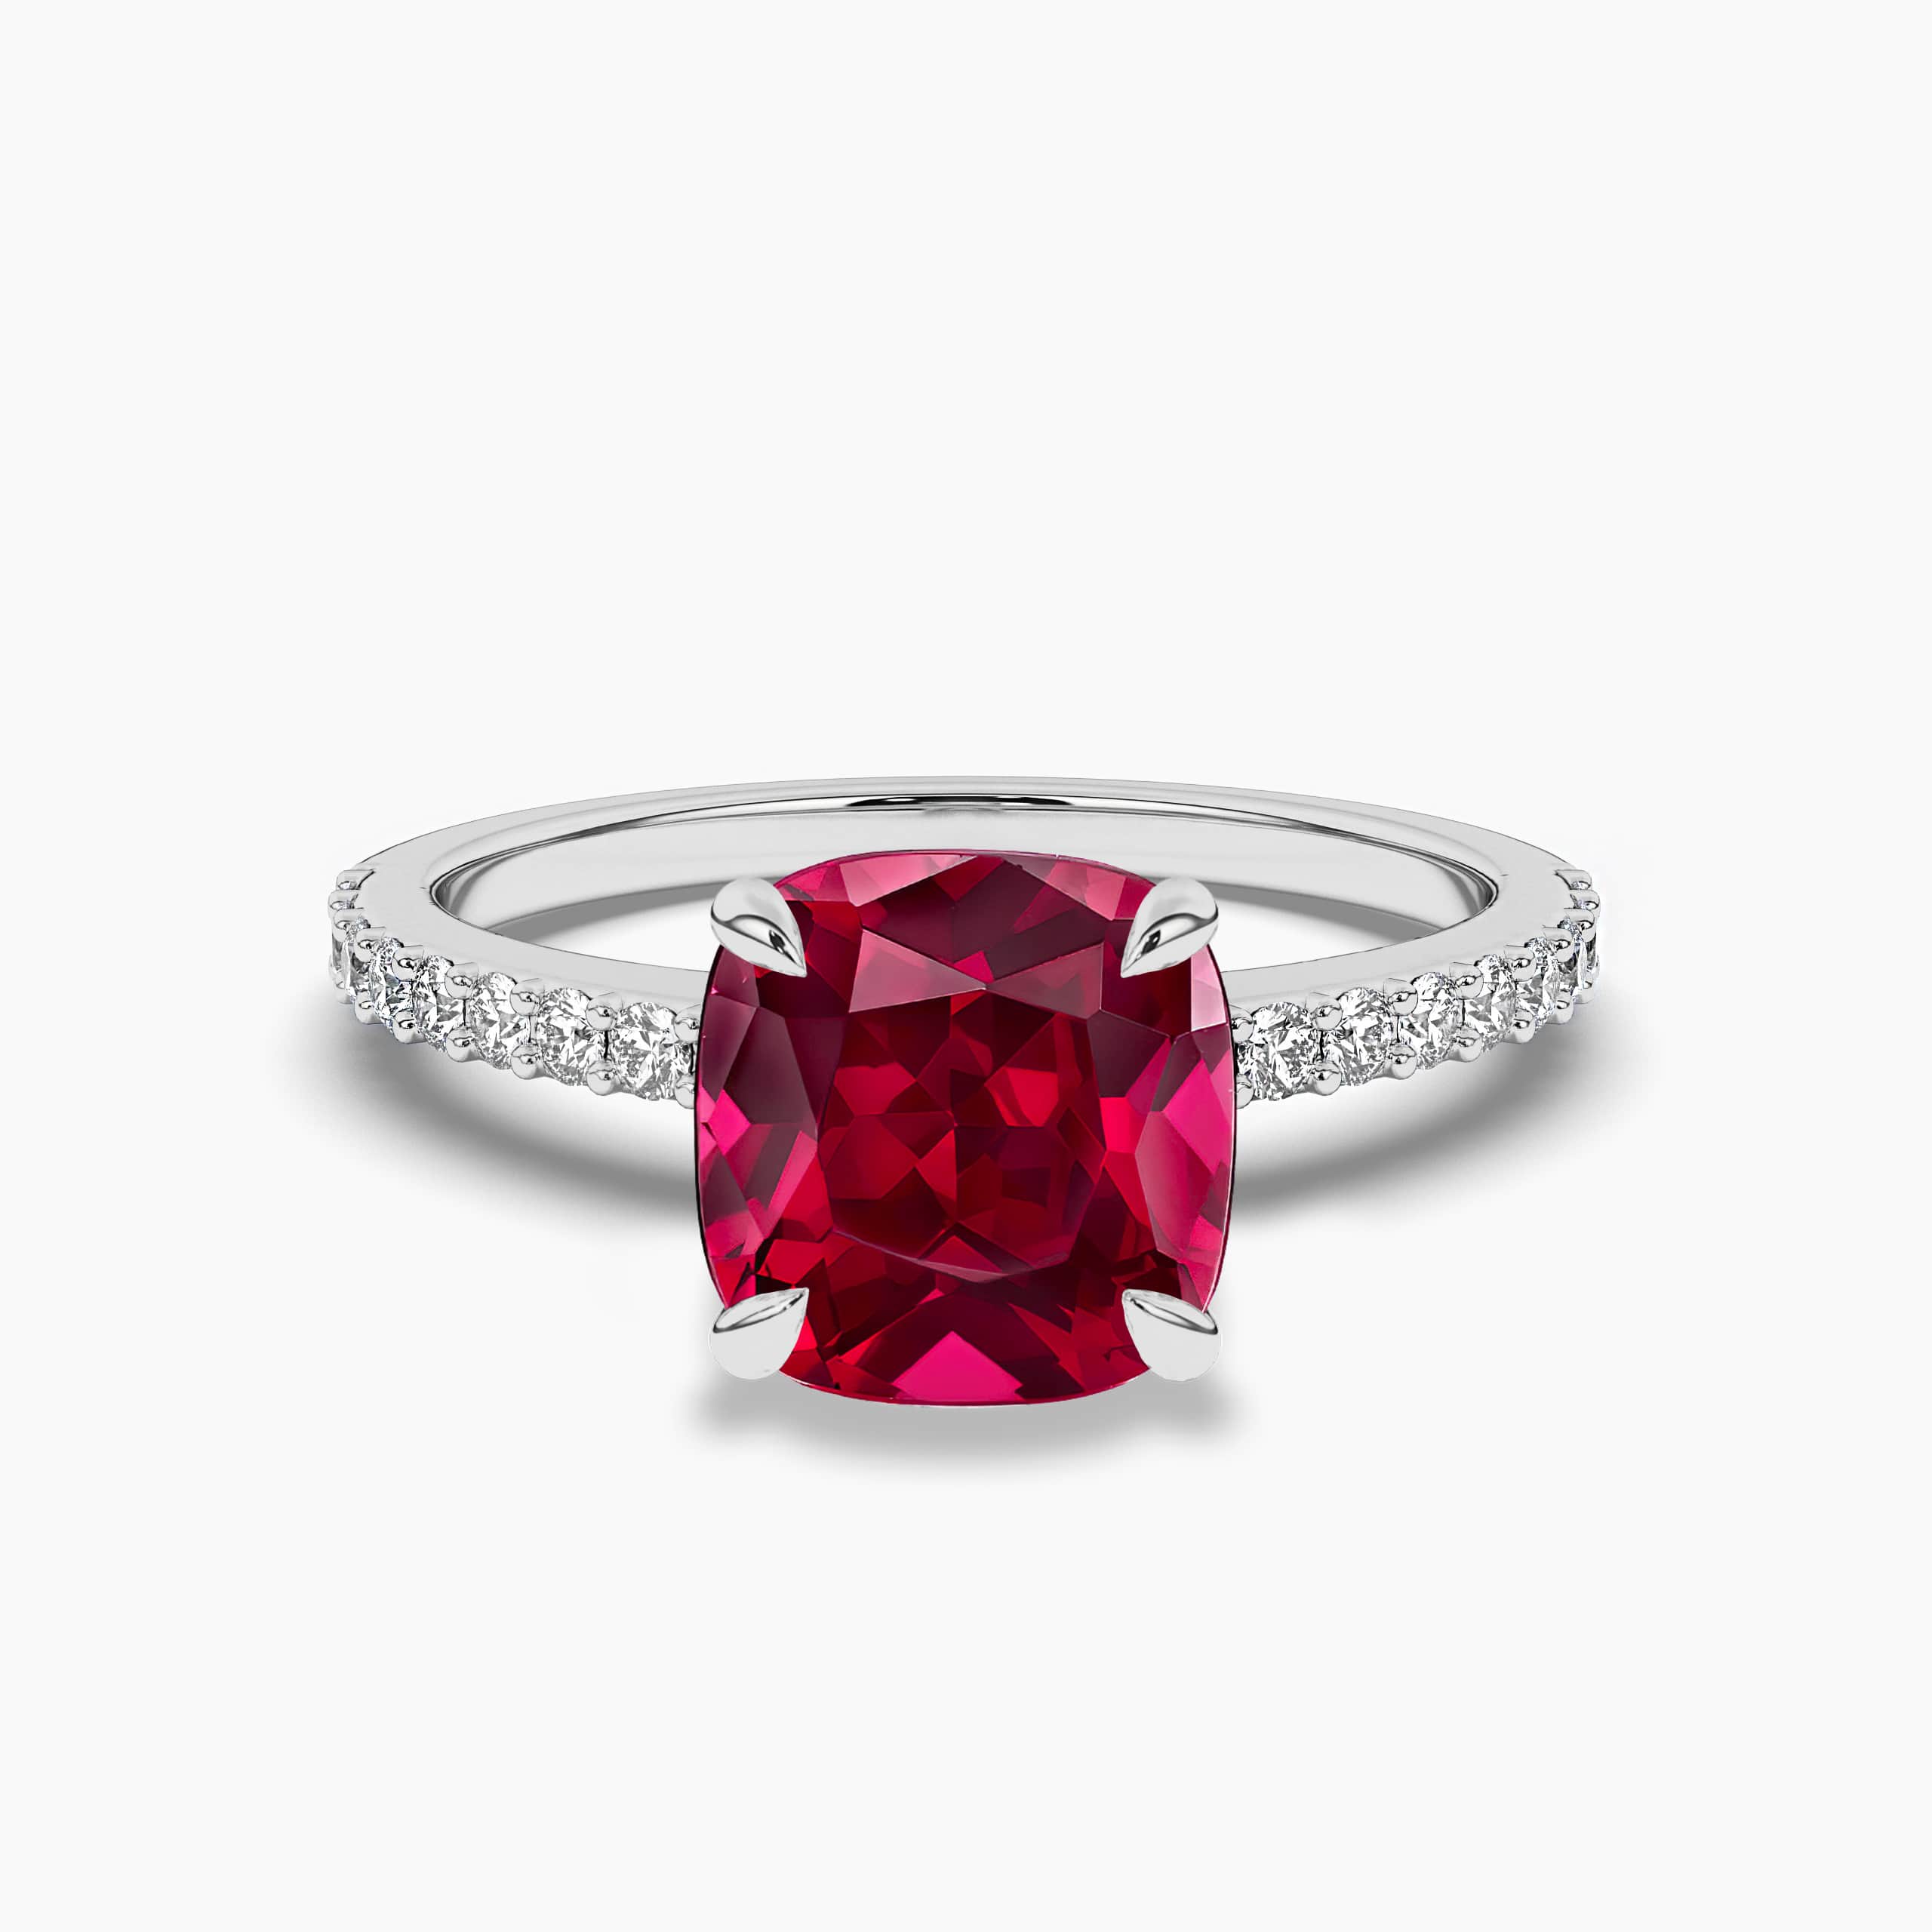 Cushion Cut Ruby Engagement Ring White Gold Ruby And Diamond Ring Unique